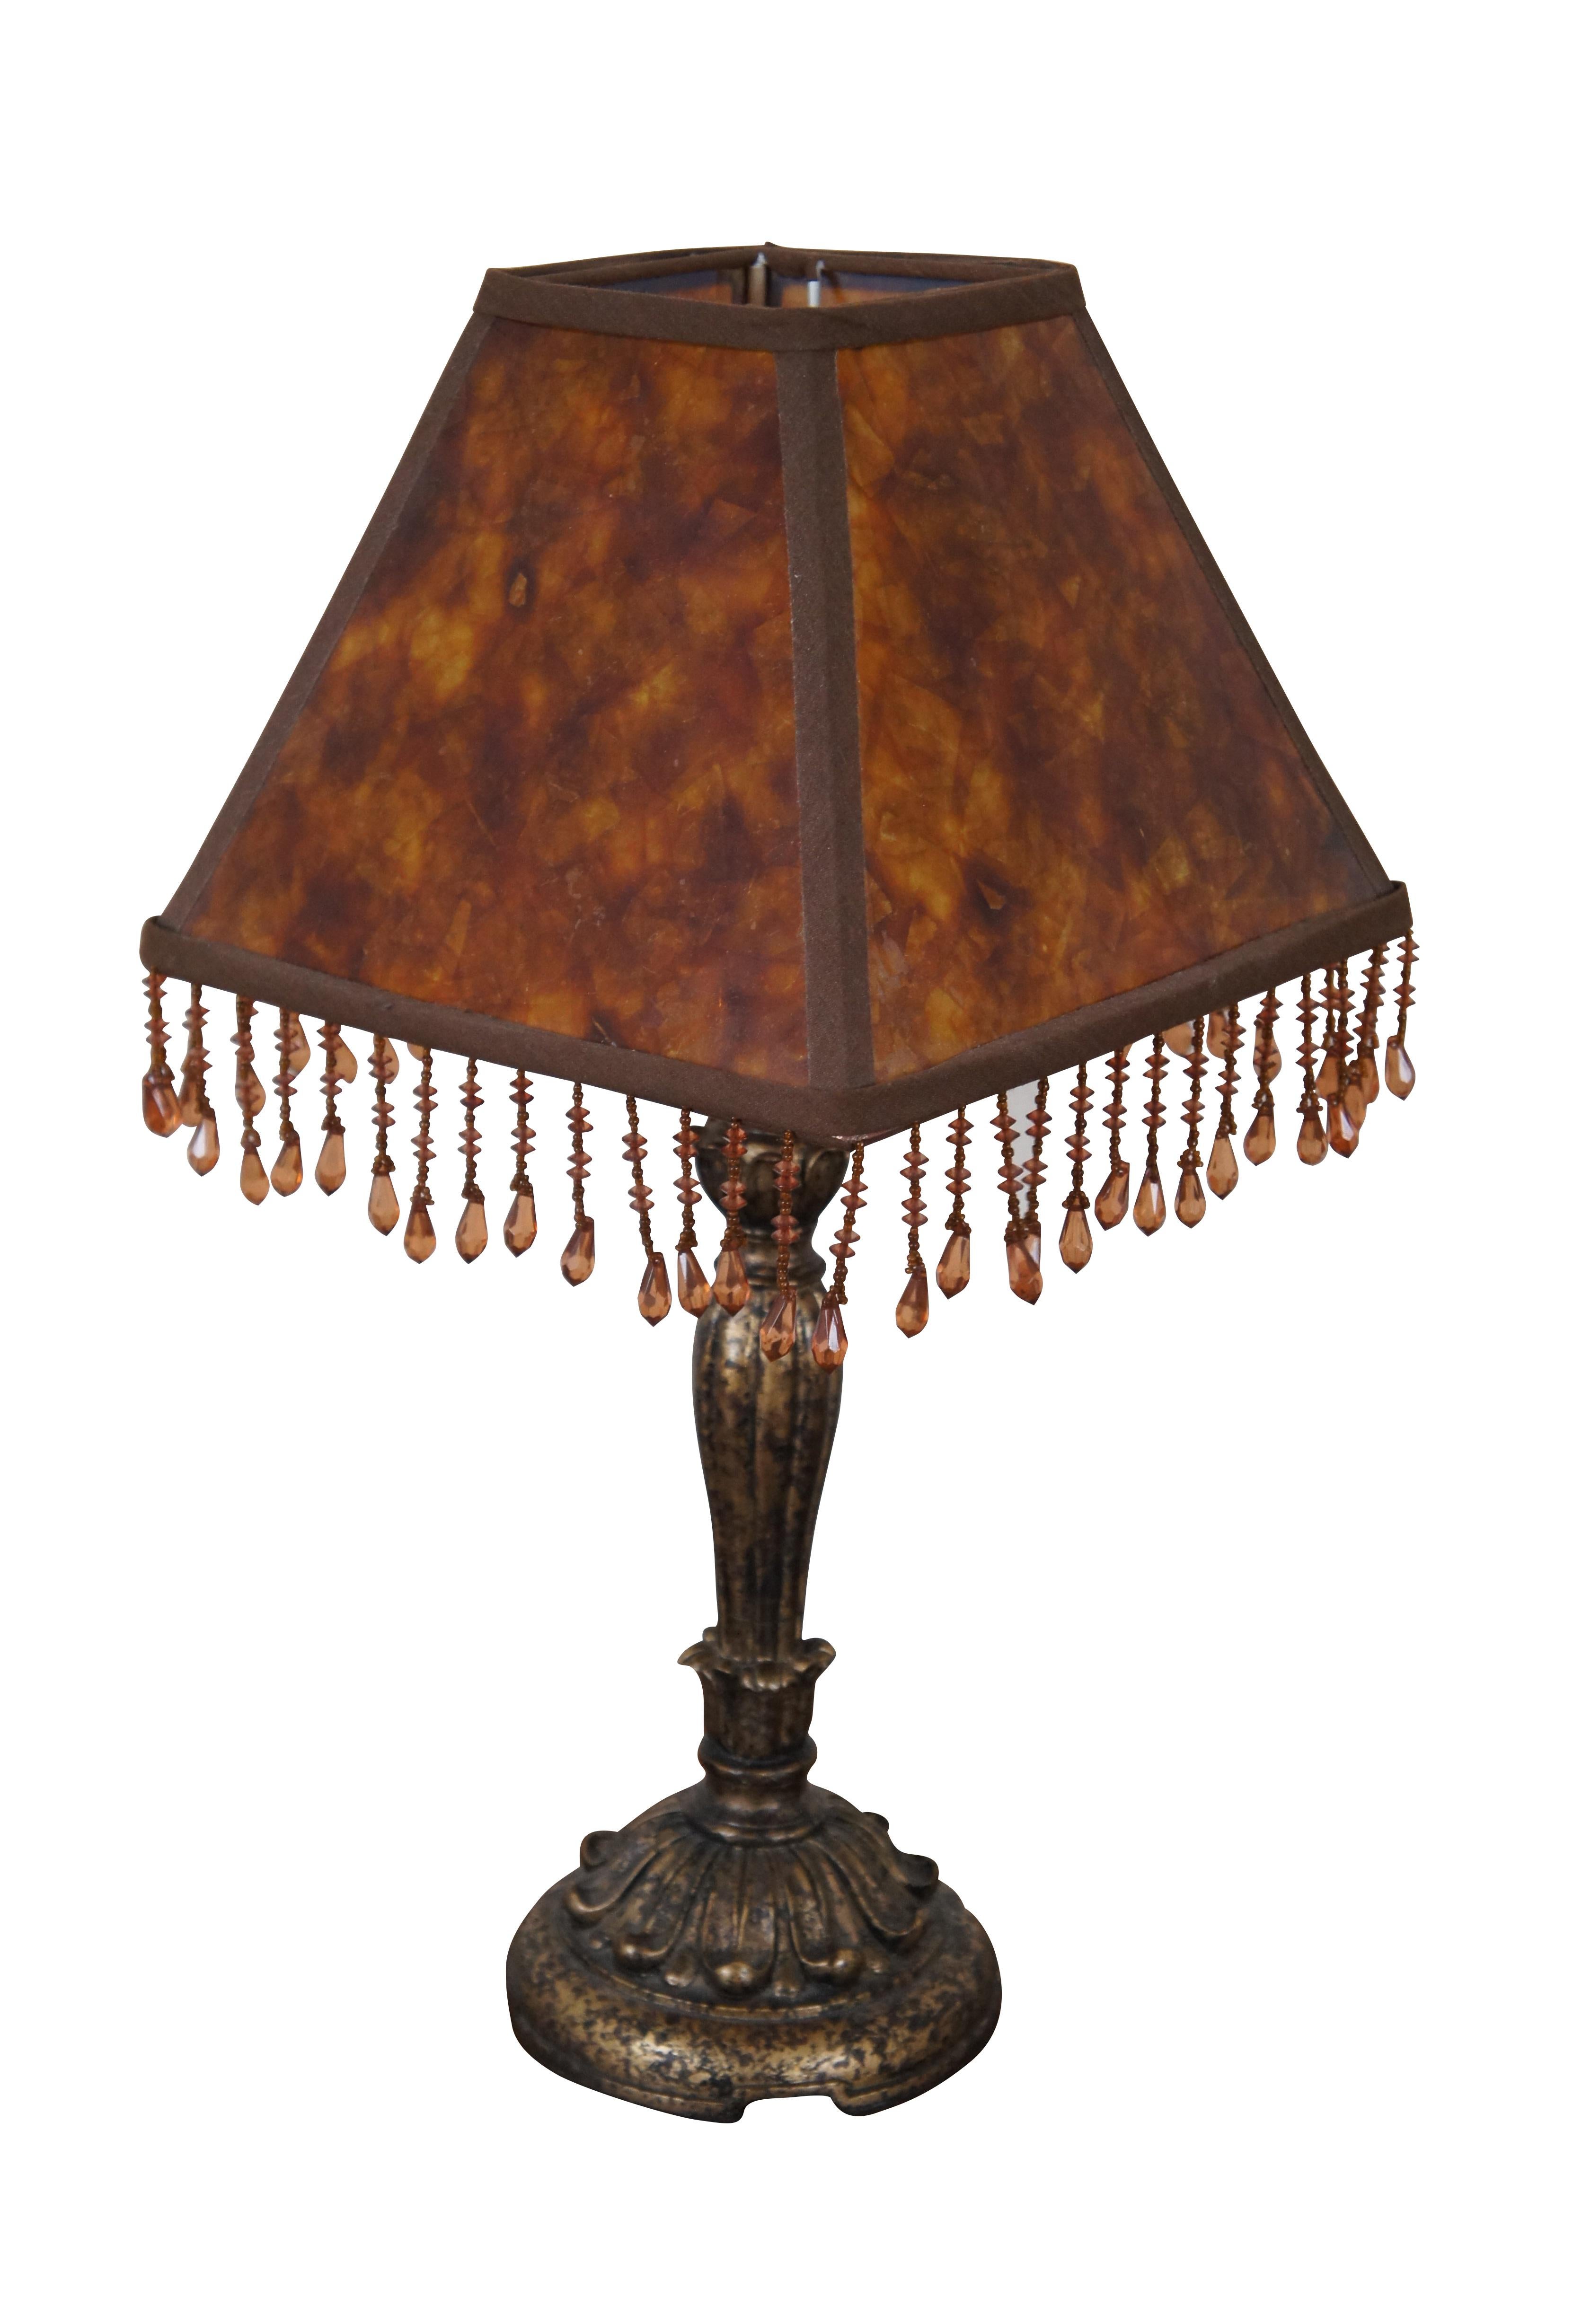 Vintage desk or table lamp featuring French style composite body with acanthus design and penshell style shade with beaded style drop crystals.

Dimensions:
5.5” x 14.5” / Shade - 9.5” x 9.5” x 7” (Width x Depth x Height)